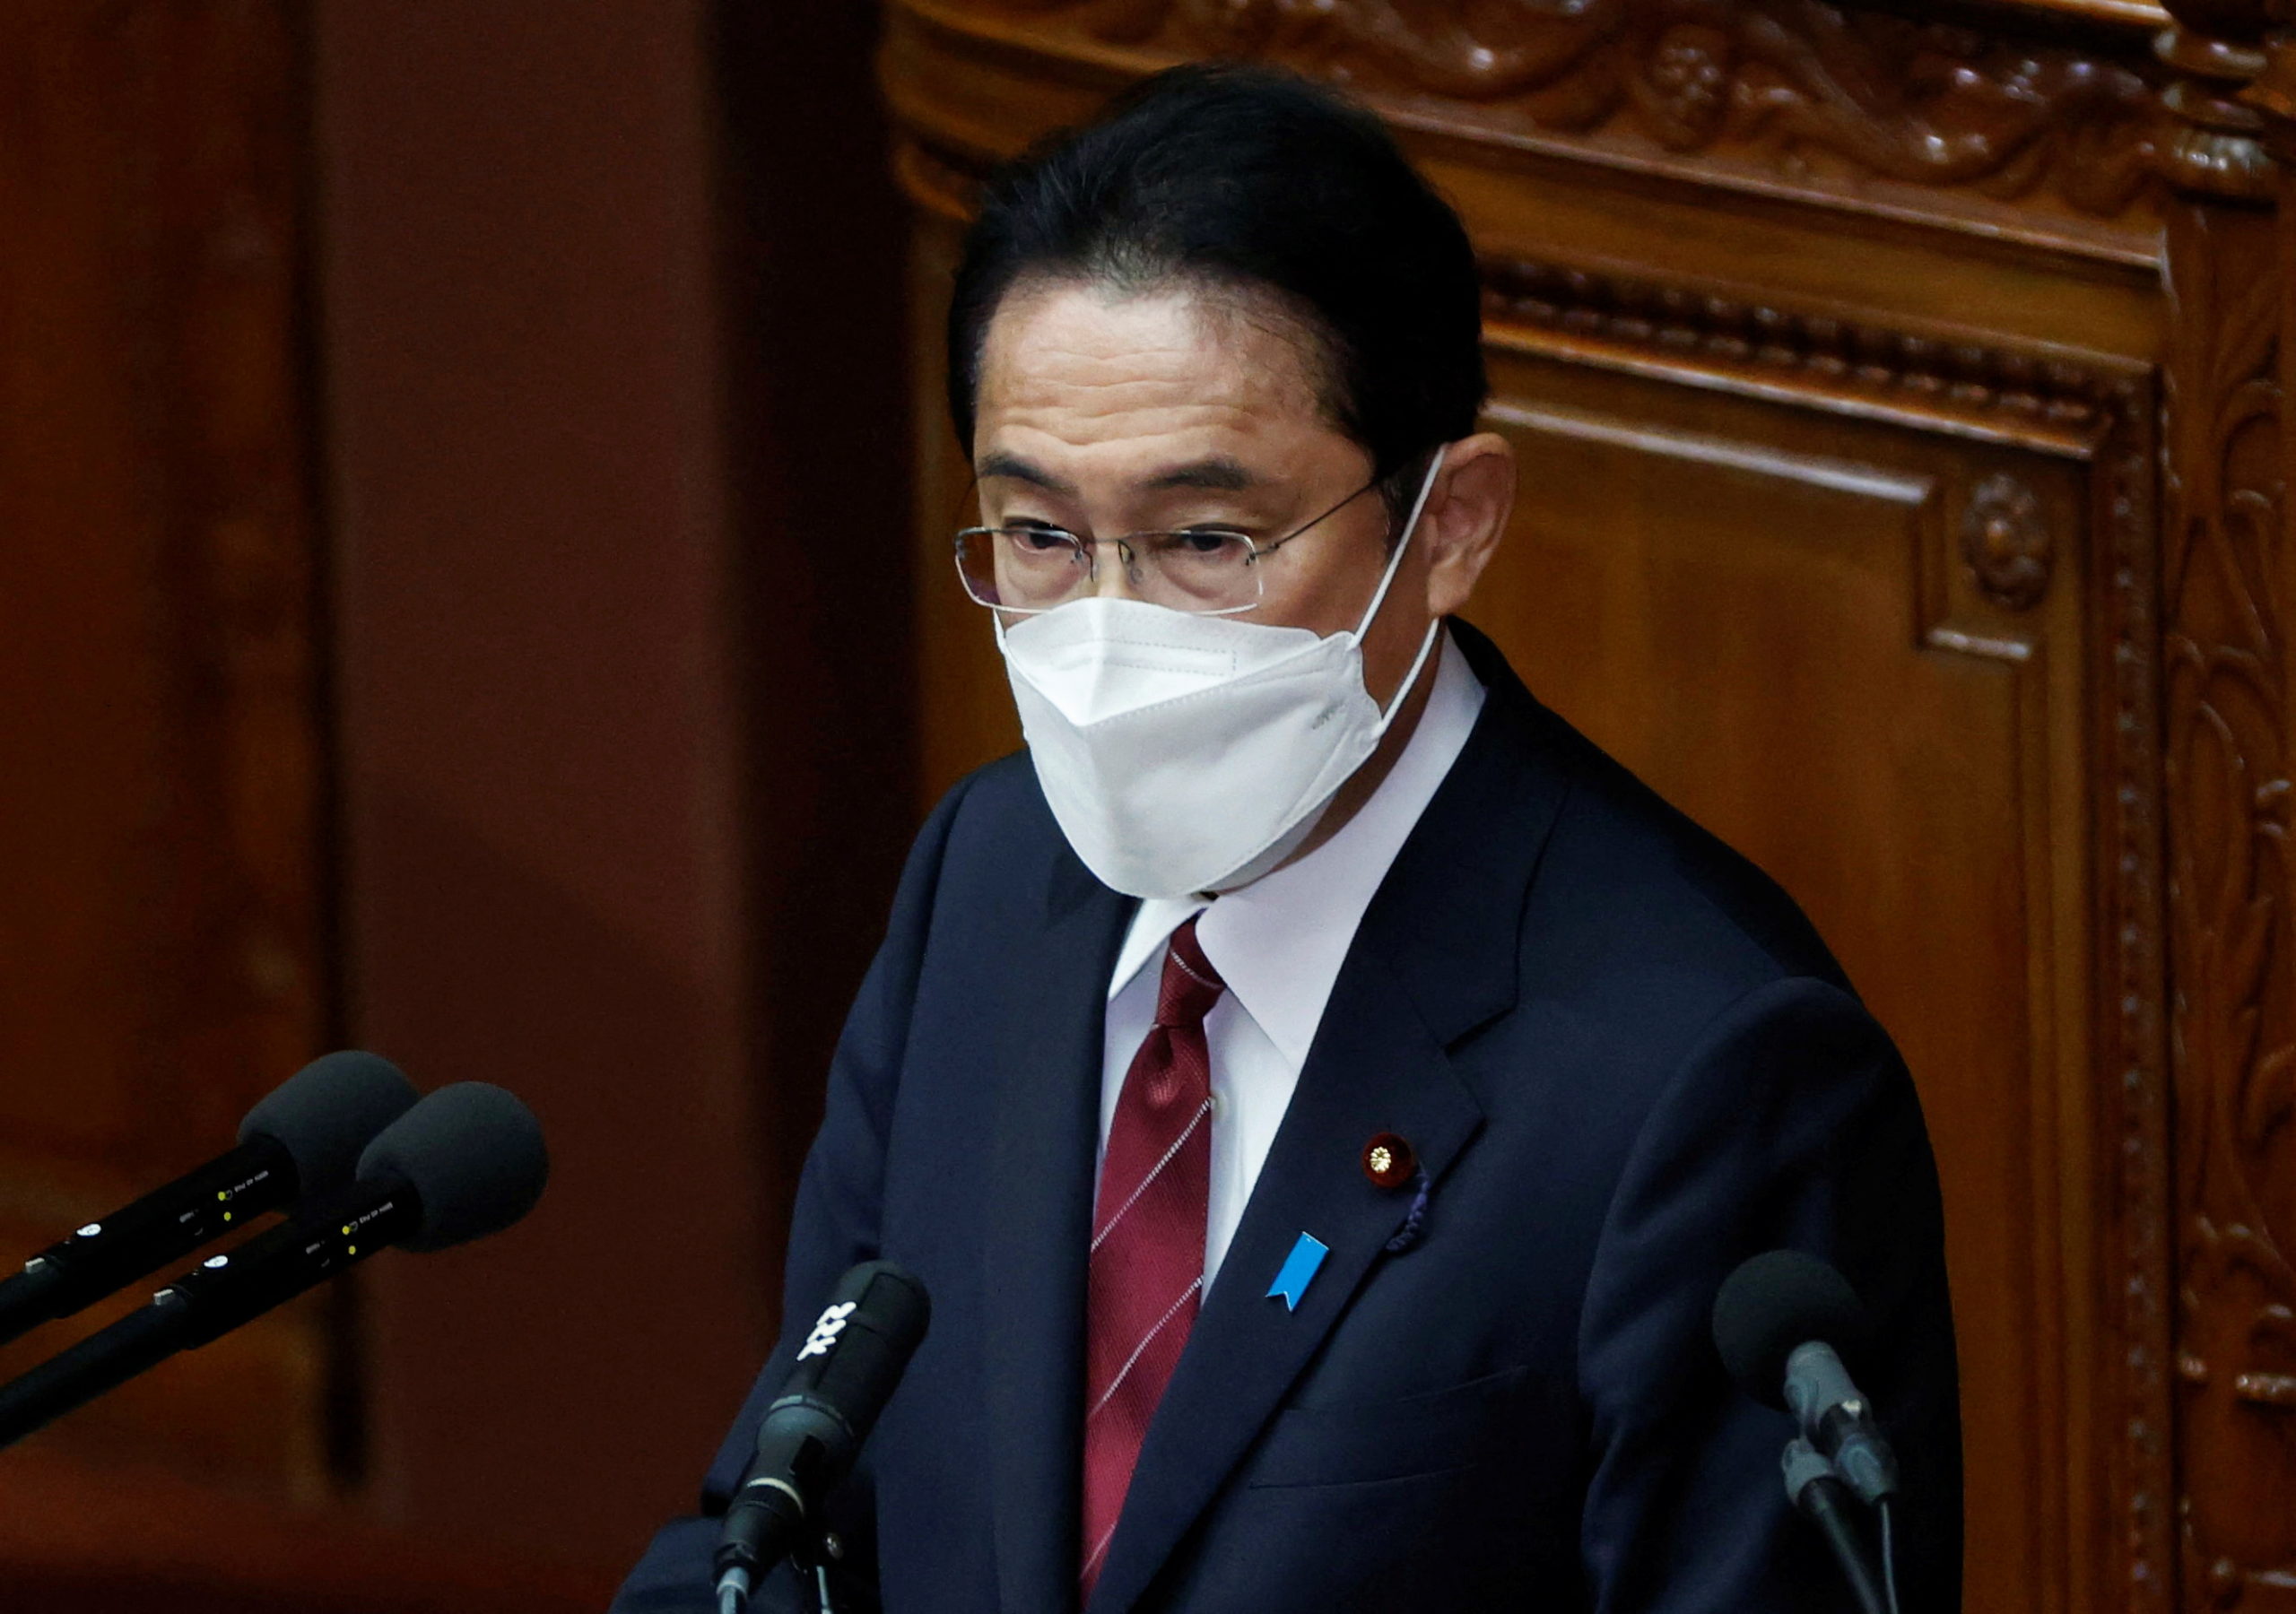 FILE PHOTO: Japan's Prime Minister Fumio Kishida wearing a protective face mask delivers his policy speech at the start of an extraordinary session of the lower house of the parliament, amid the coronavirus disease (COVID-19) pandemic, in Tokyo, Japan December 6, 2021. 